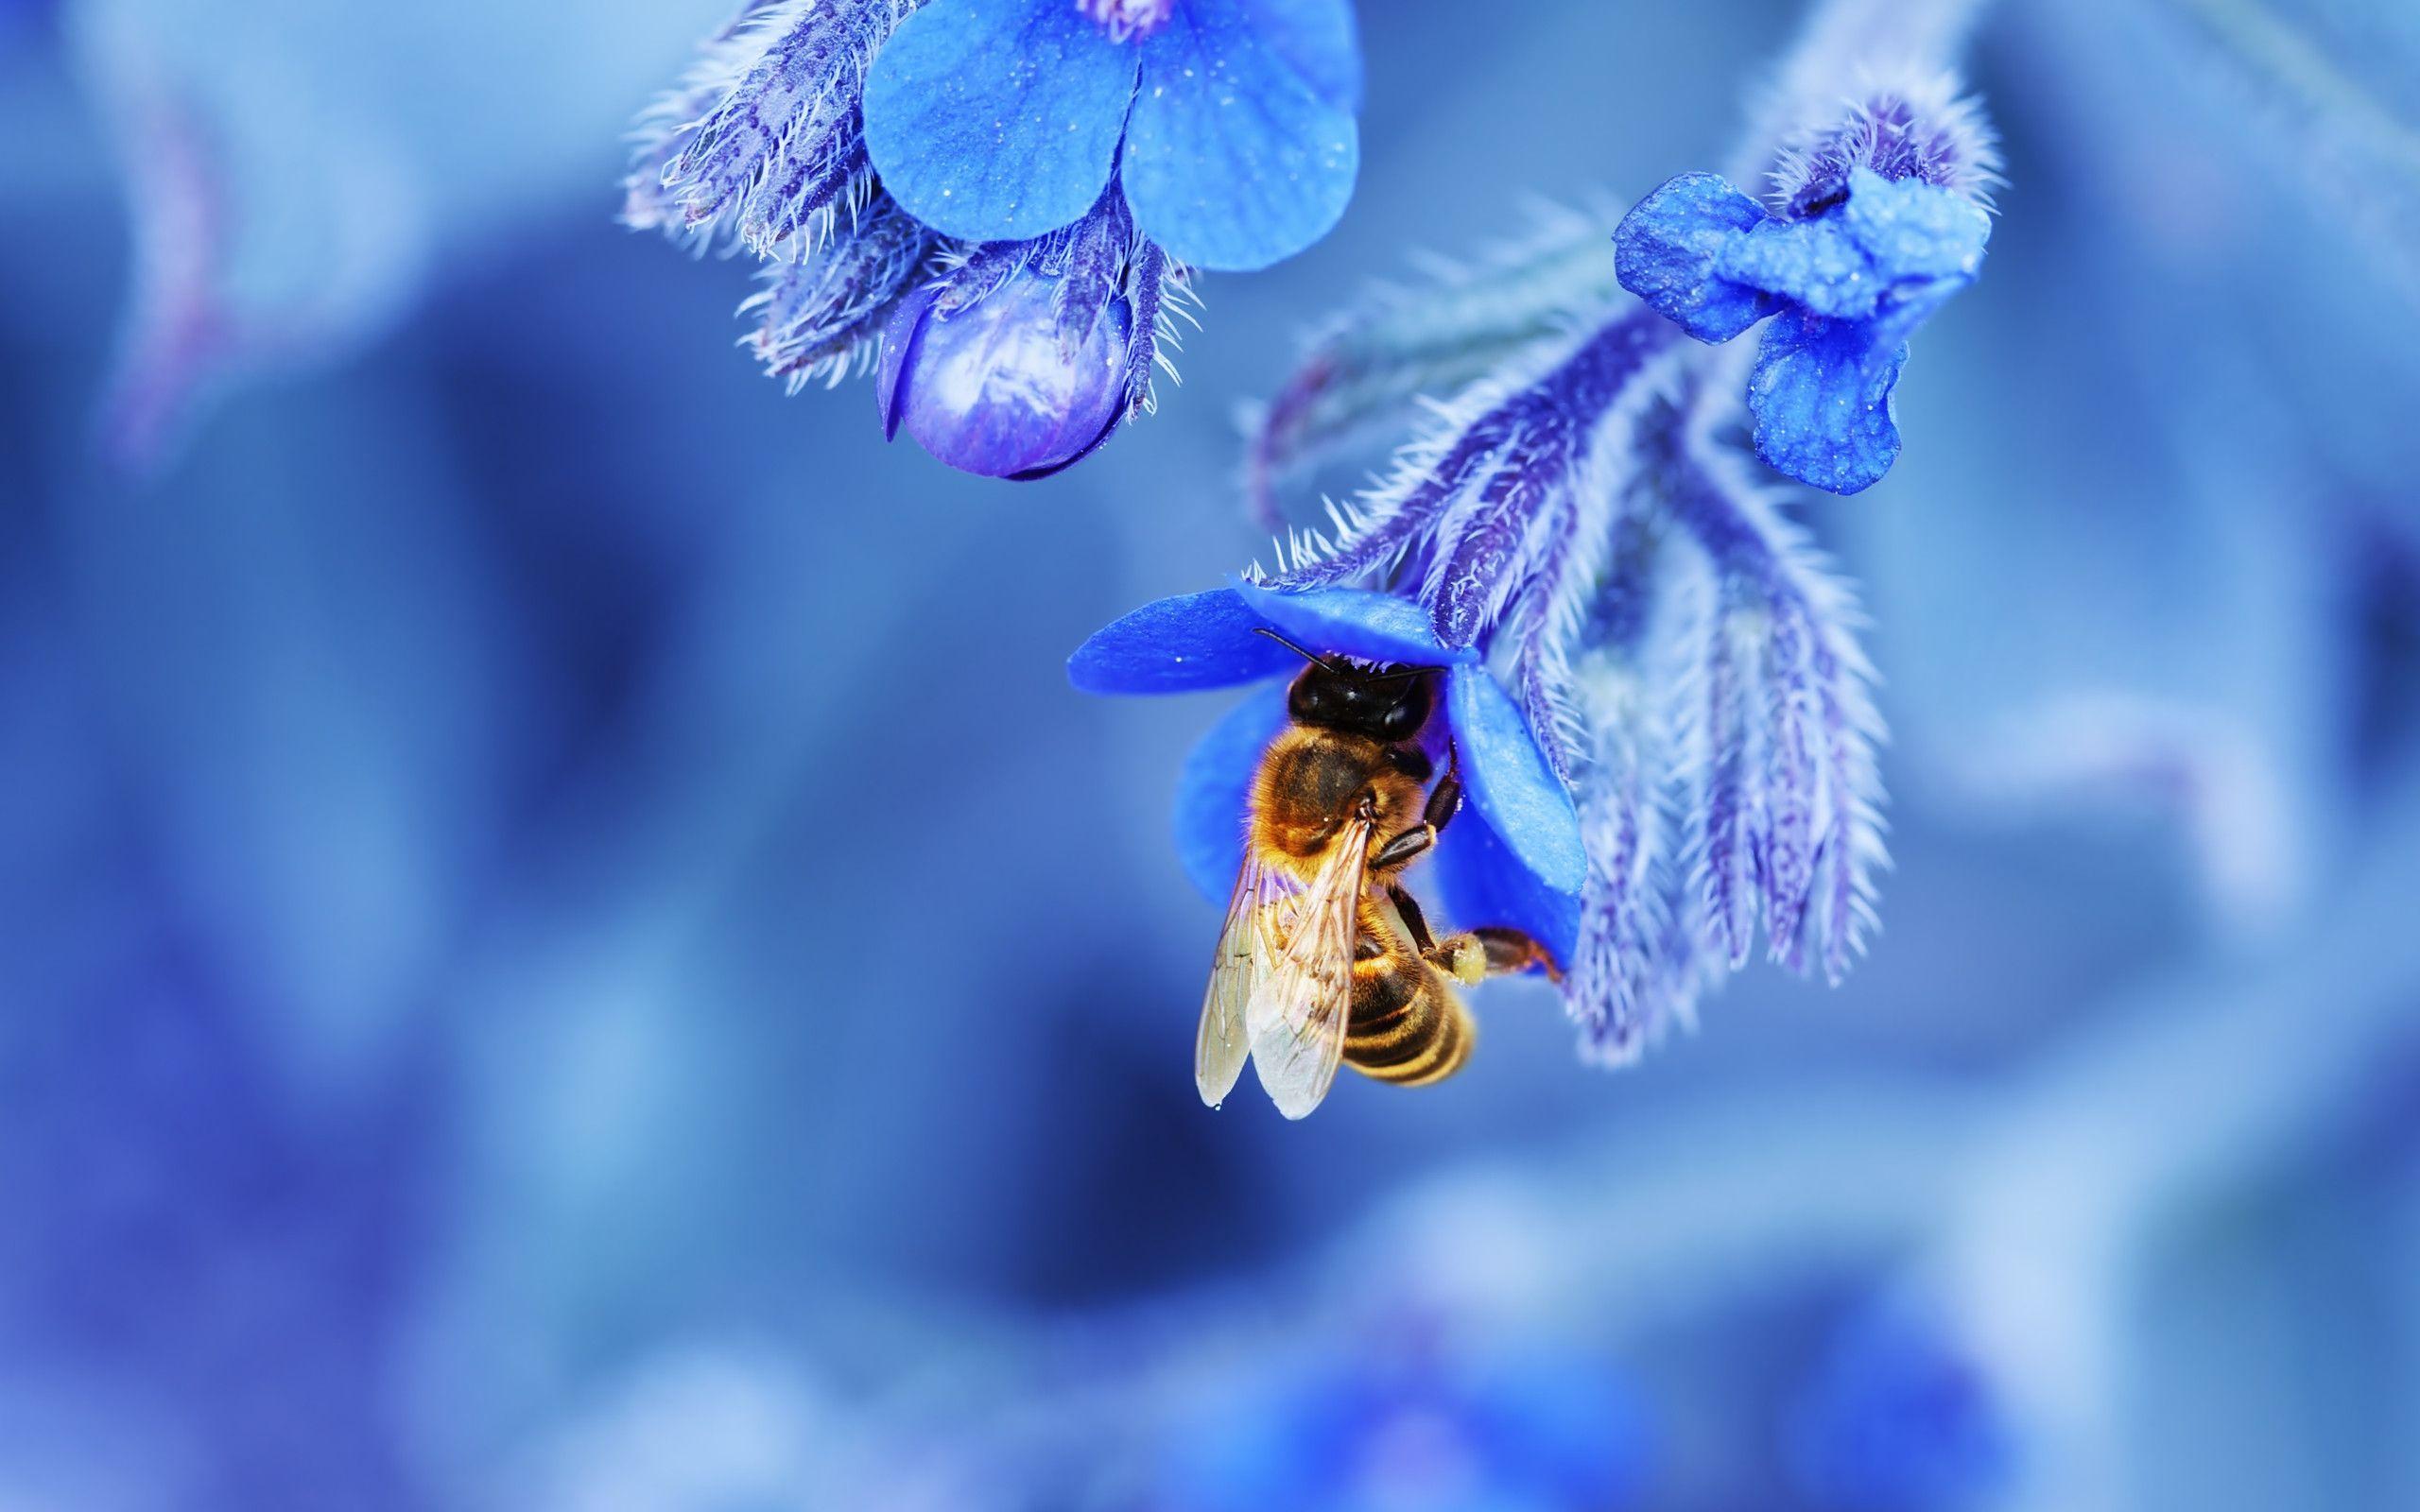 Bee Wallpaper New HD Image For Photo Free Download